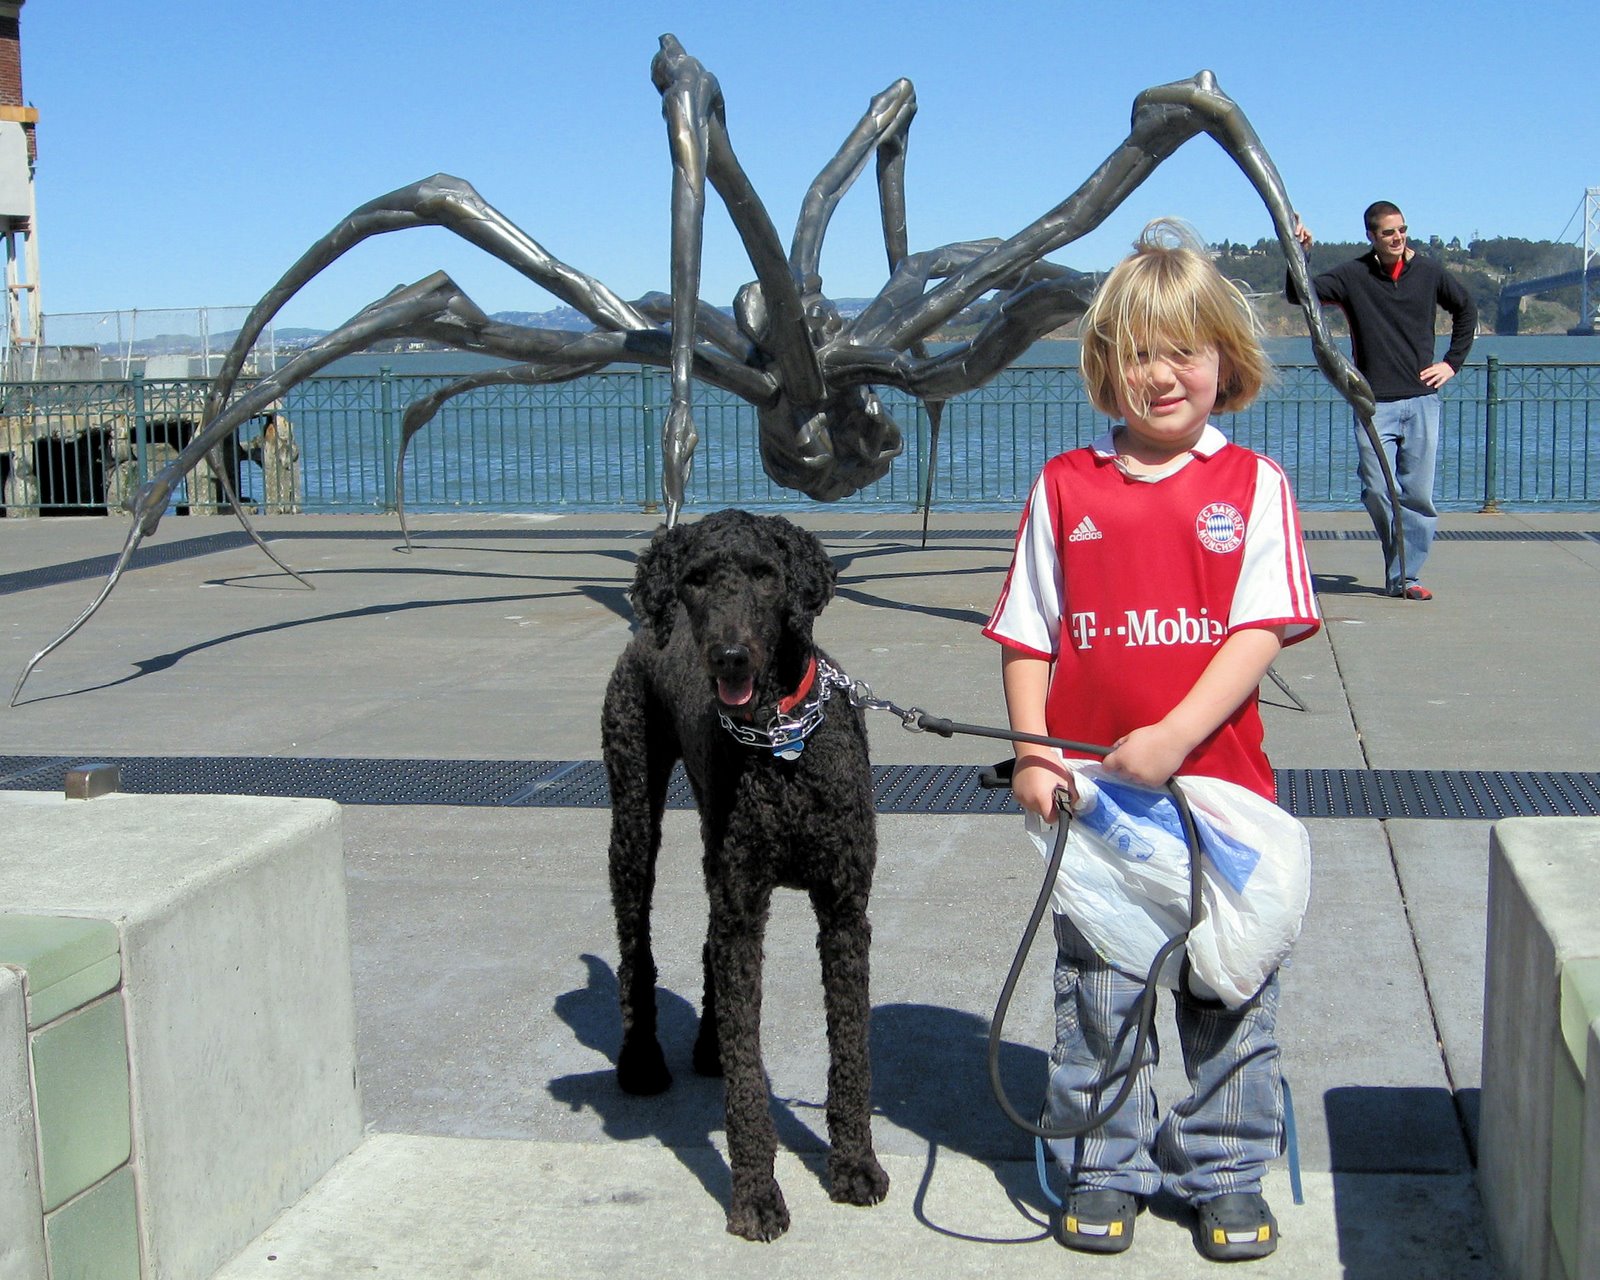 [Emmi,+Louie+and+the+spider.jpg]